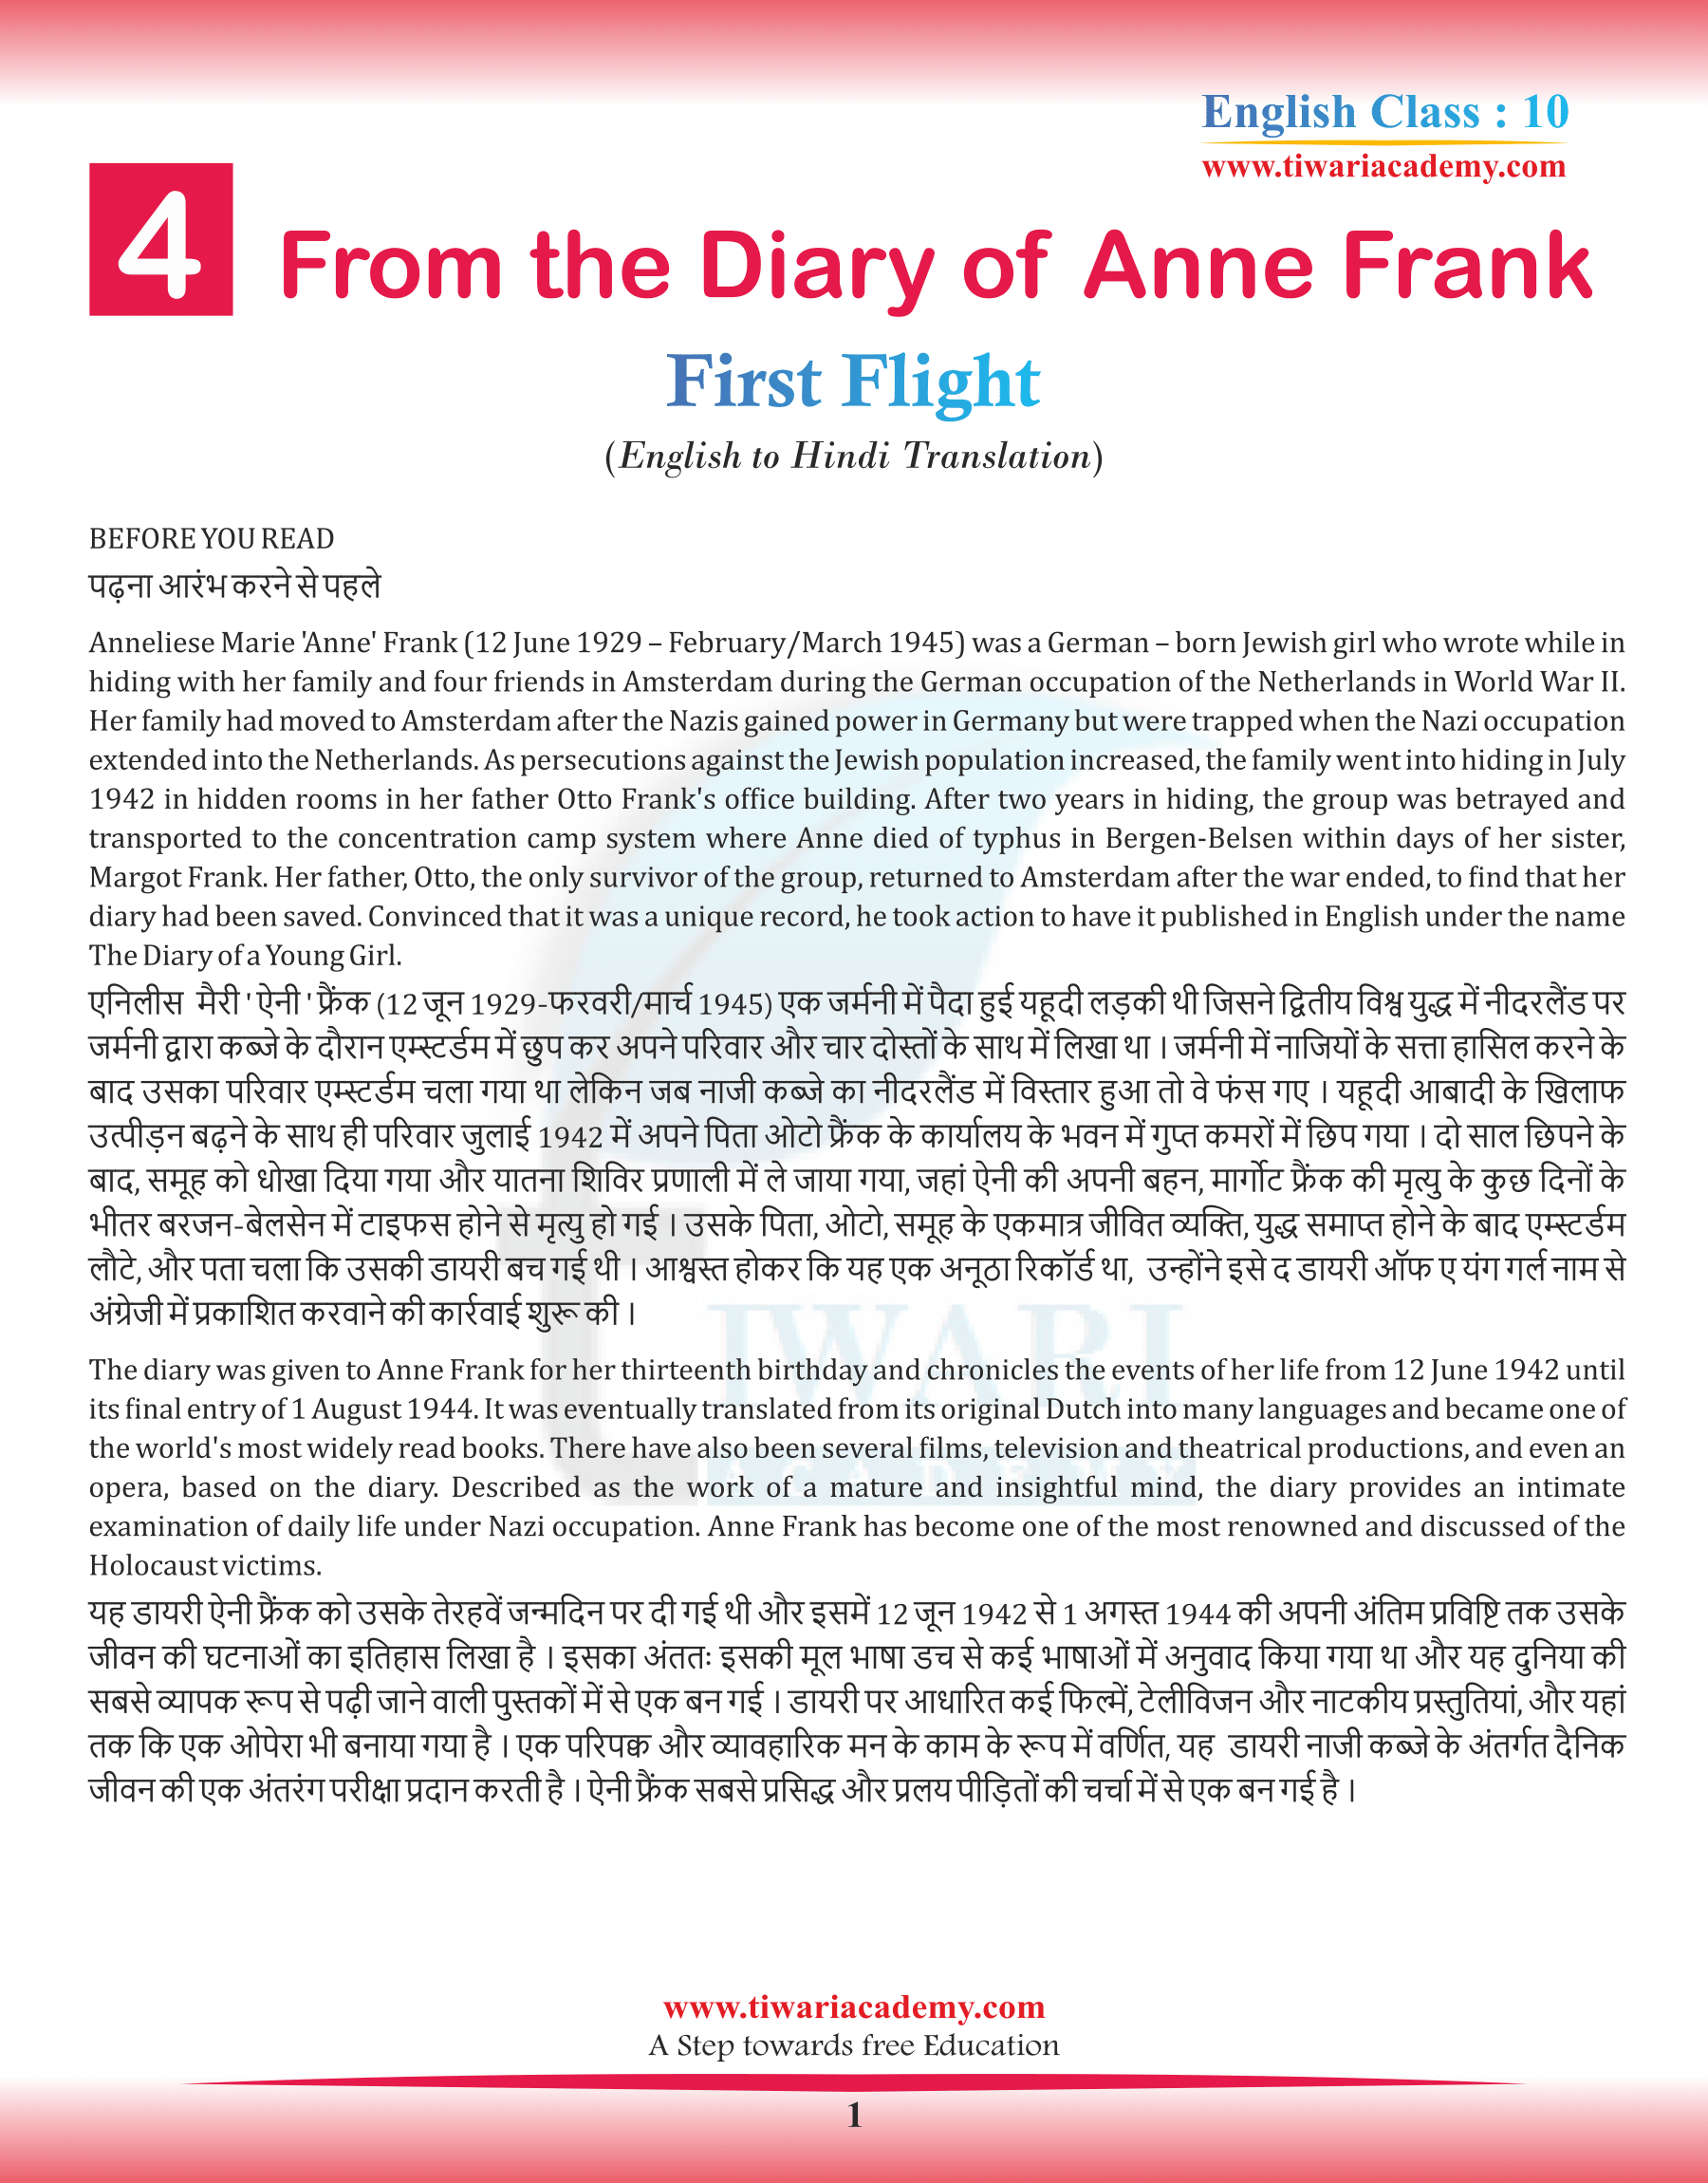 Class 10 English First Flight Chapter 4 From the Diary of Anne Frank in Hindi